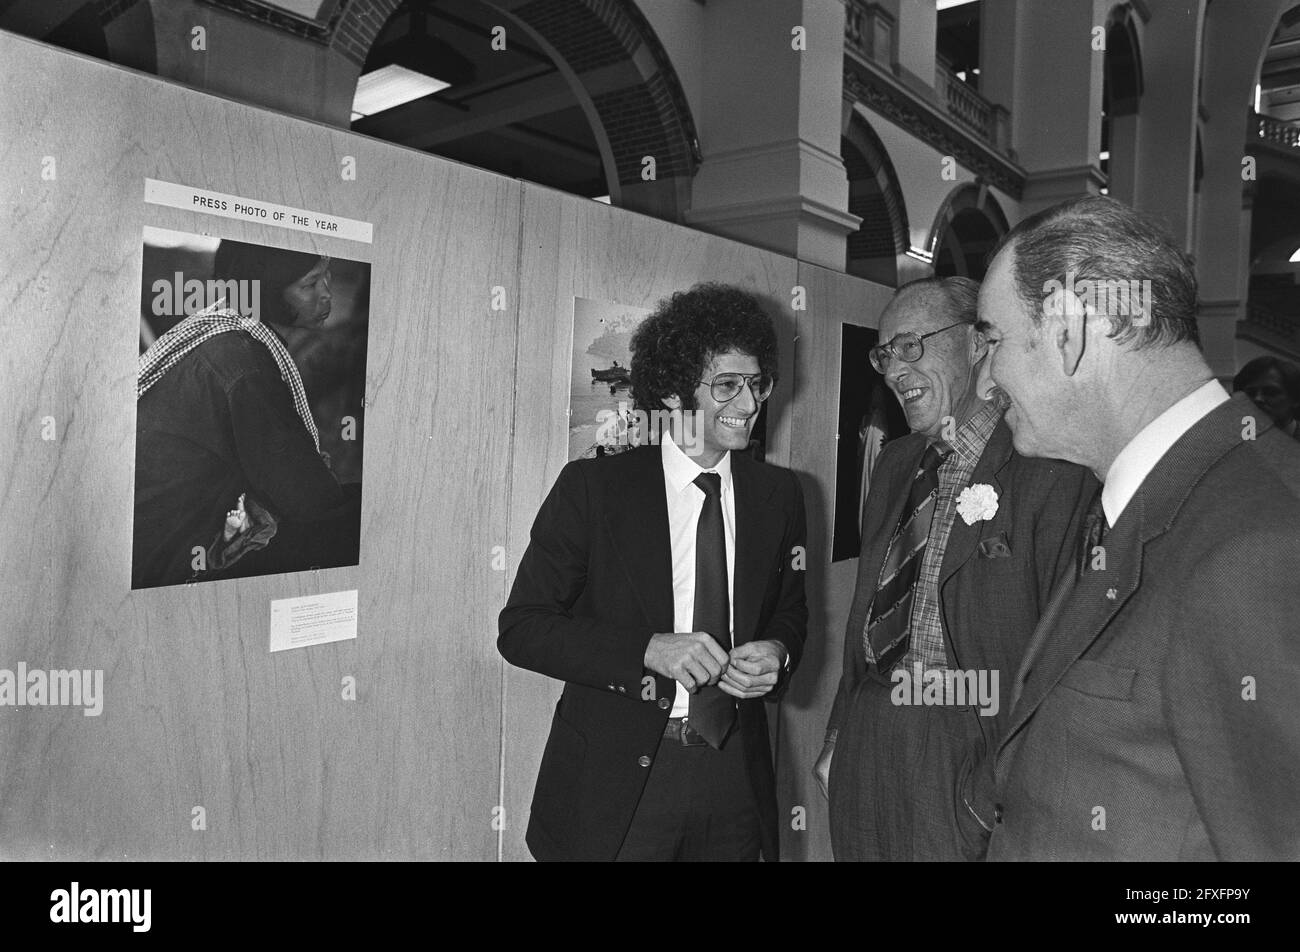 World Press Photo awards ceremony in Tropenmuseum; from left to right winner David Burnett, Prince Bernhard and minister v.d. Klaauw at winning photo, April 2, 1980, PRIZES, Awards, photography, ministers, The Netherlands, 20th century press agency photo, news to remember, documentary, historic photography 1945-1990, visual stories, human history of the Twentieth Century, capturing moments in time Stock Photo